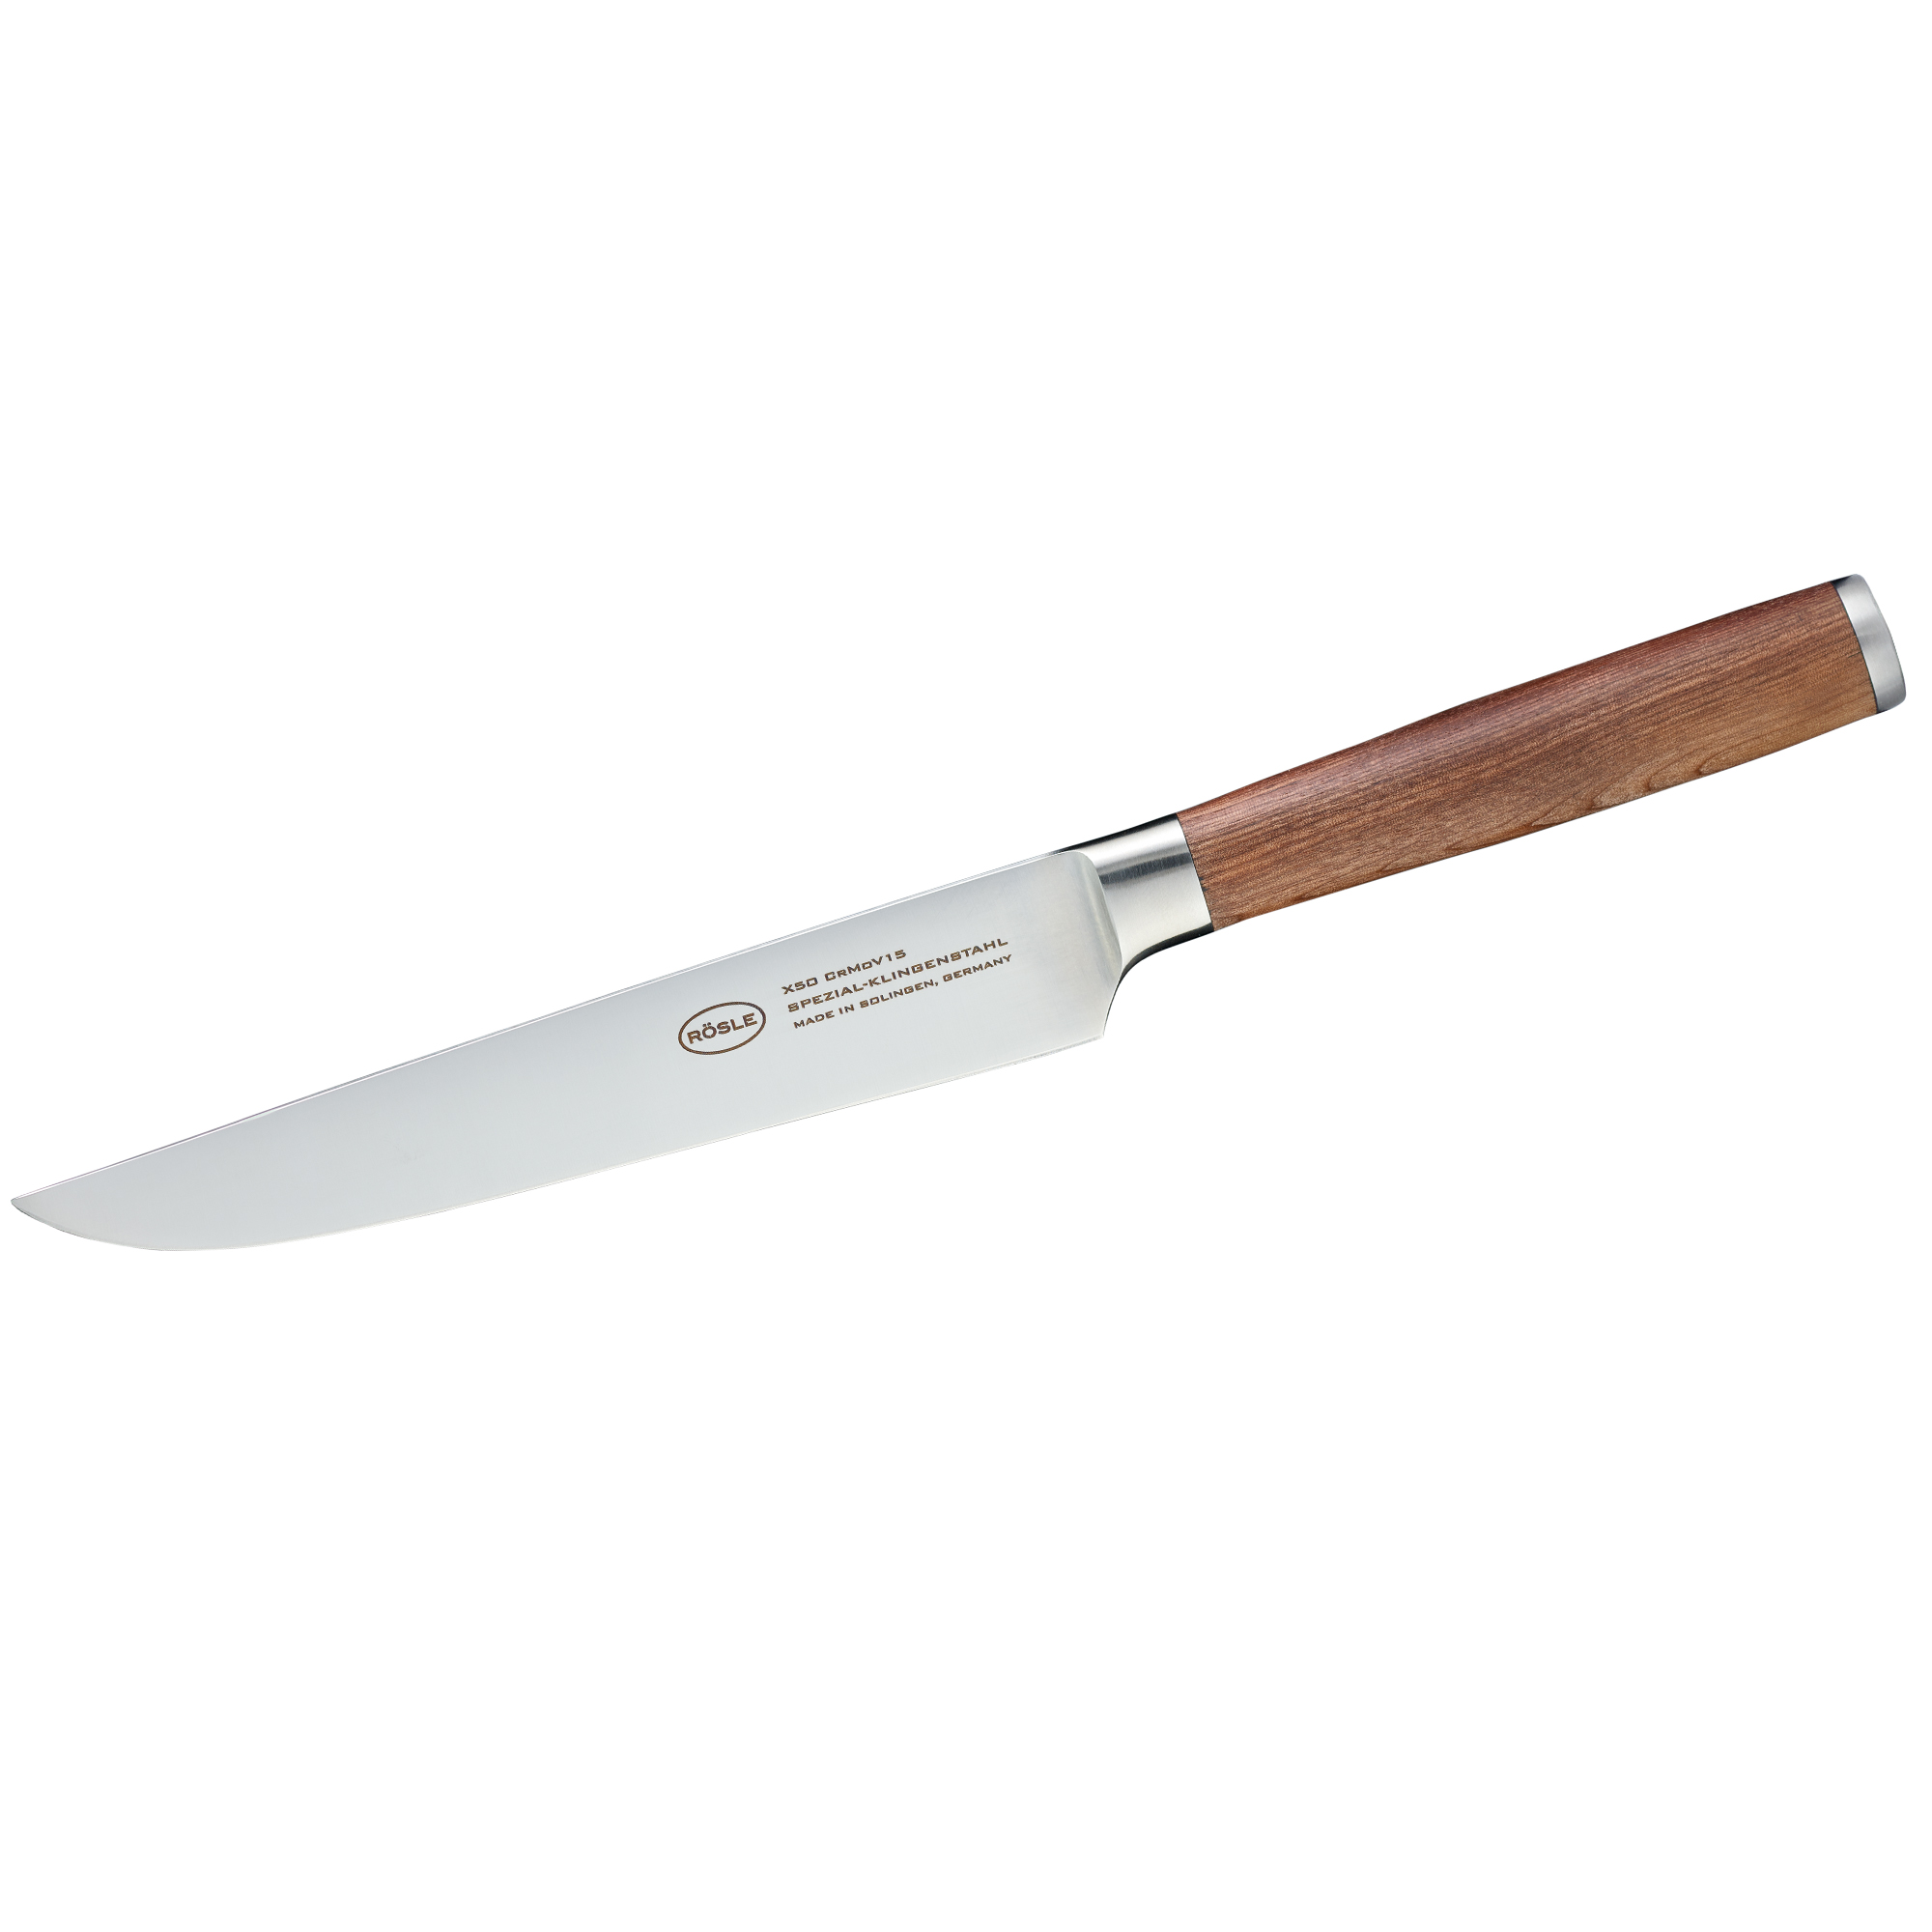 Carving knife Masterclass 18 cm